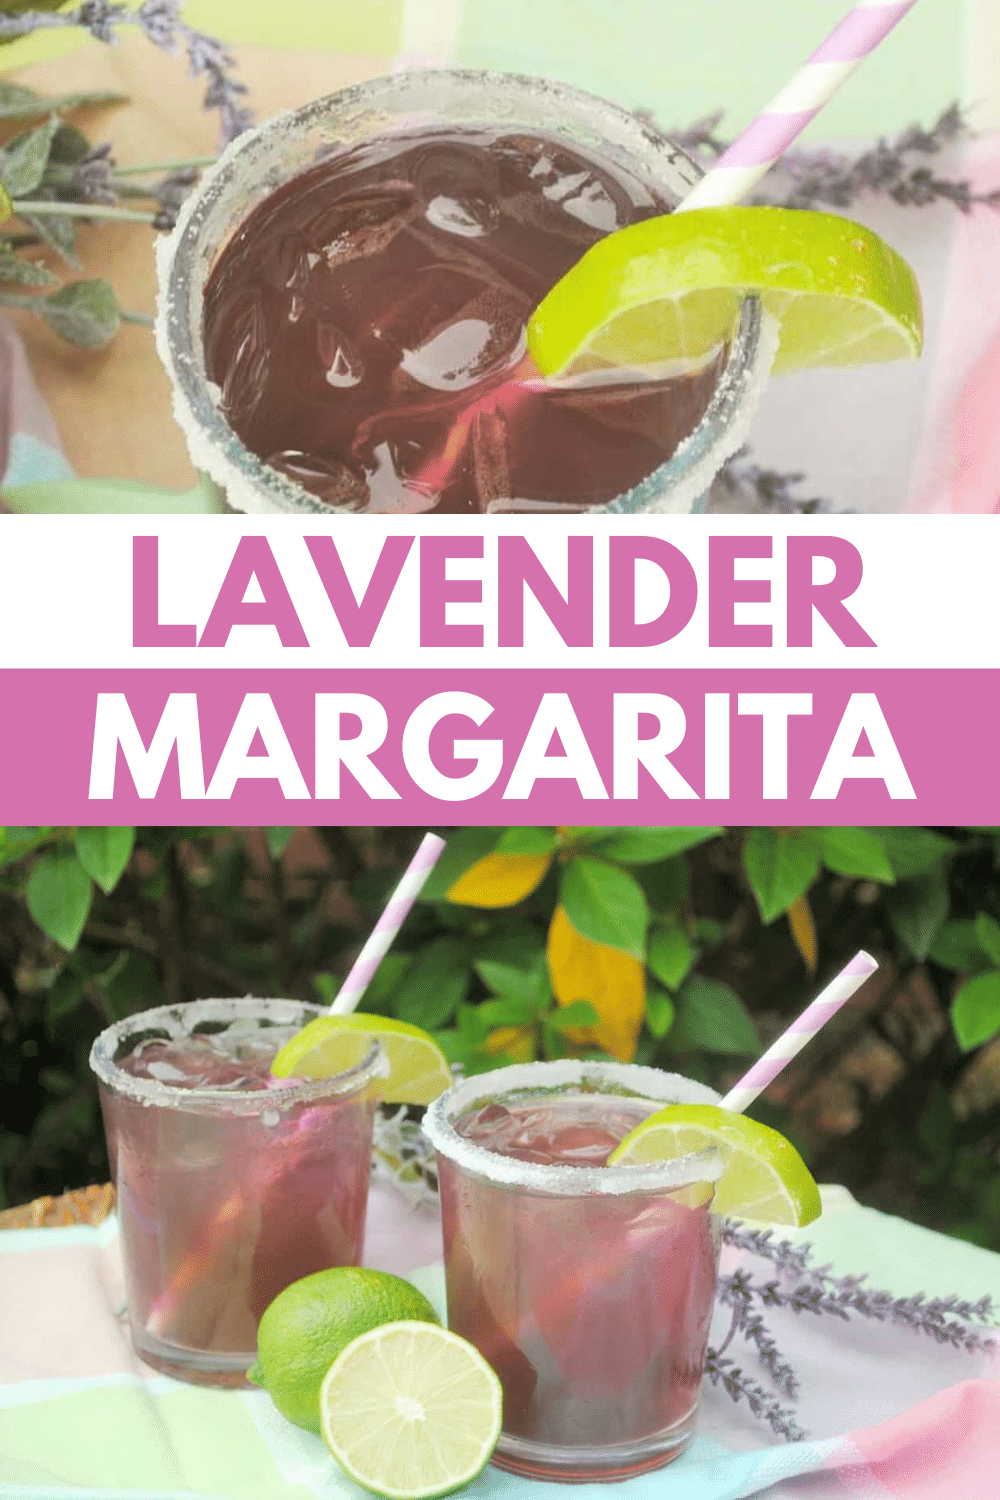 This Lavender Margarita is a sweet drink made with a few simple ingredients. It's a unique and refreshing cocktail perfect for Cinco de Mayo. #lavendermargarita #cocktails #margaritas #lavendermargaritarecipe #lavender via @wondermomwannab